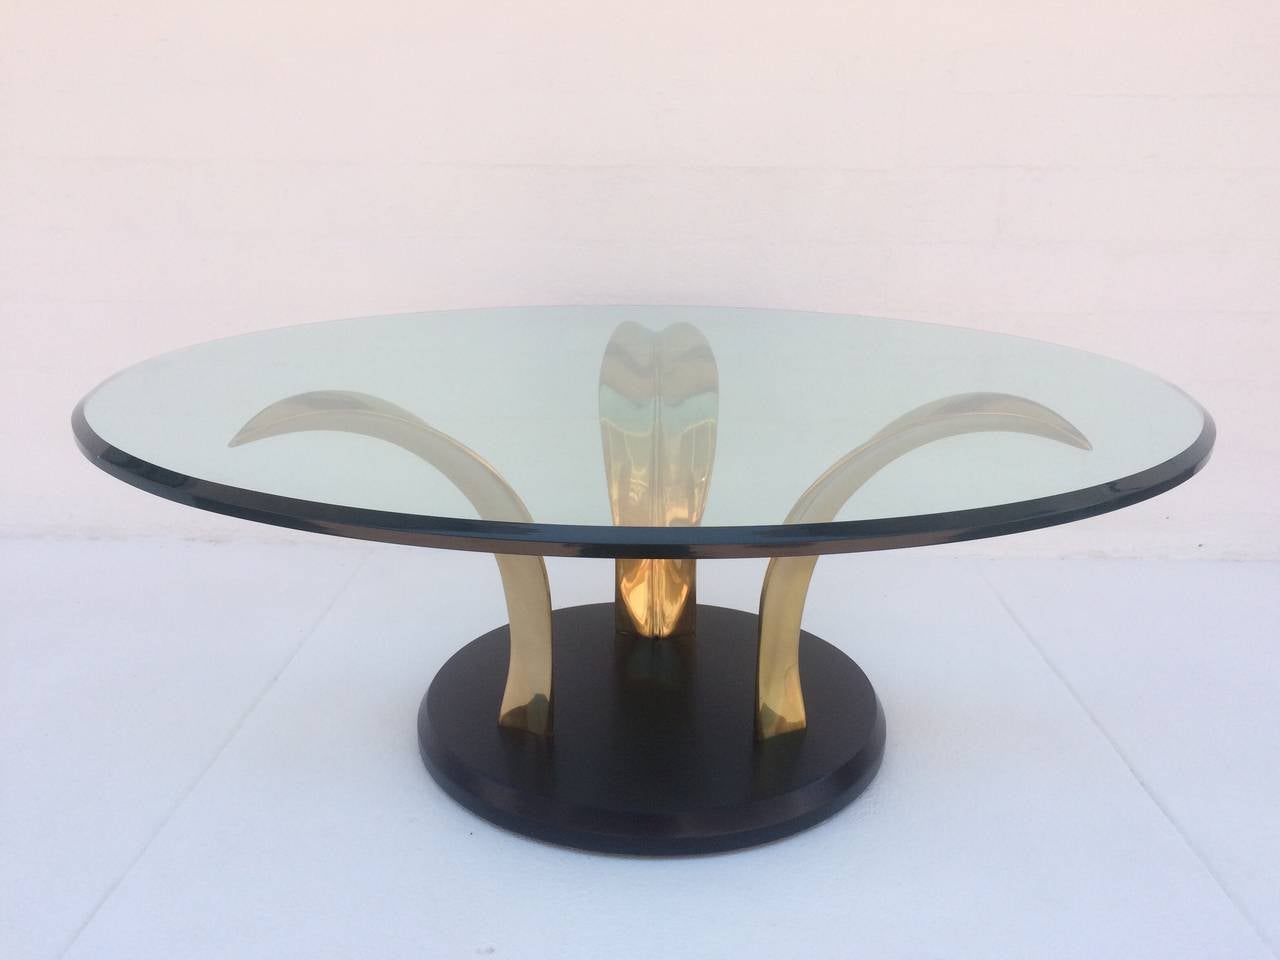 1970s polished brass and glass coffee or cocktail table. 
Consist of a black laquer base that has three polished brass leafs that support a 40.5